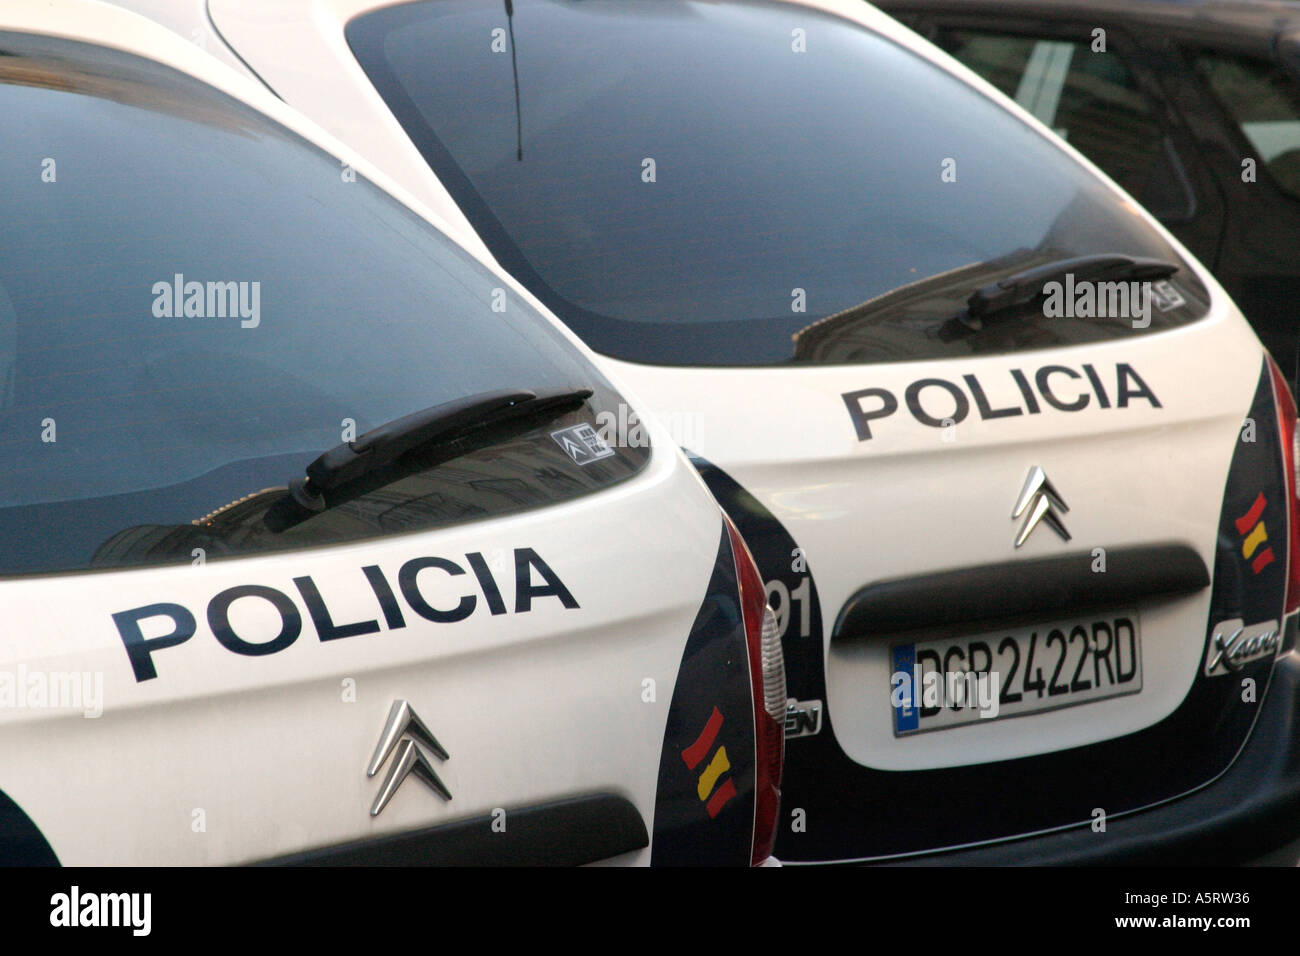 Two police cars Spain Stock Photo